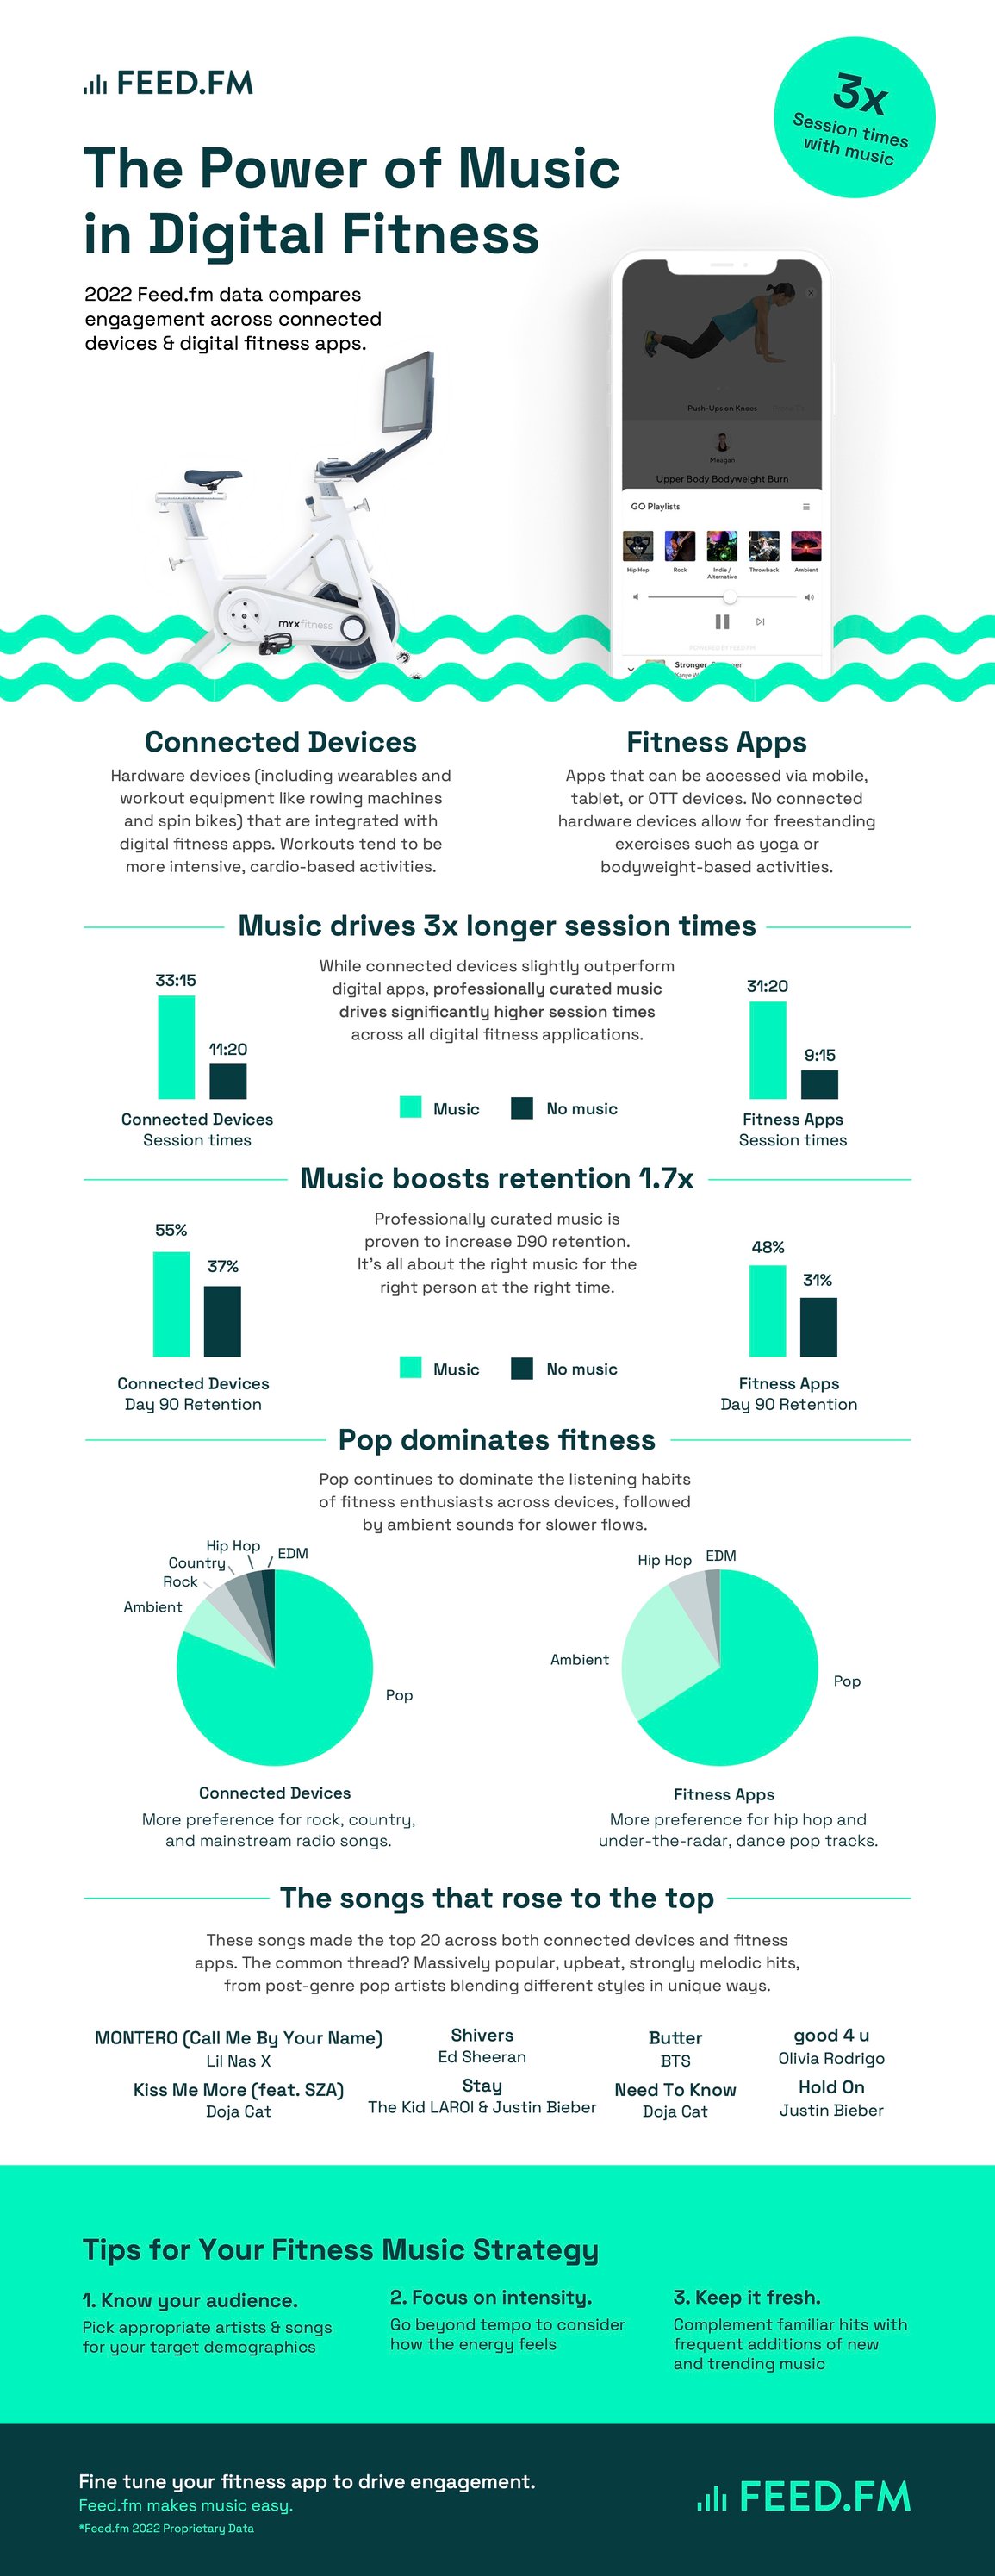 Power%20of%20Music%20Infographic HD.jpg?width=1155&name=Power%20of%20Music%20Infographic HD